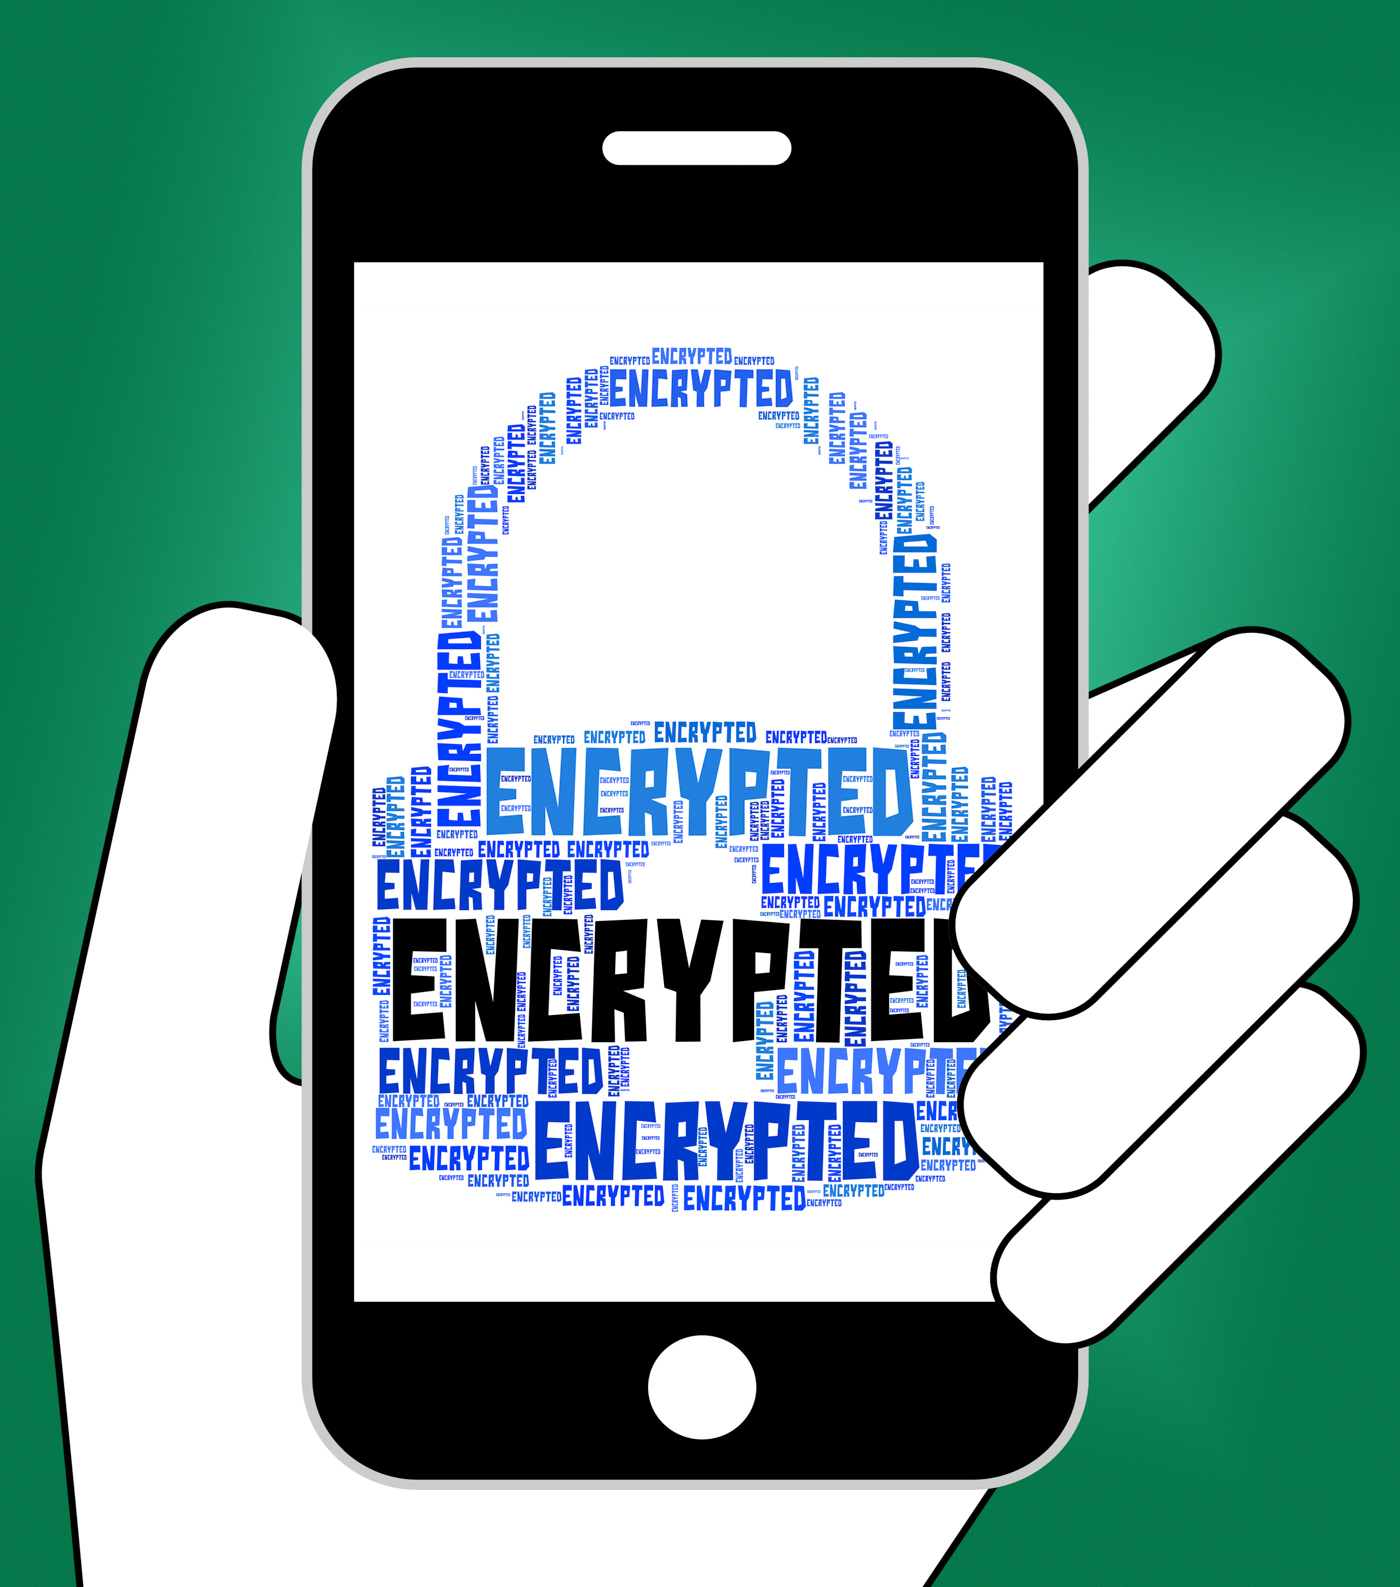 Encrypted word means encryption words and password photo